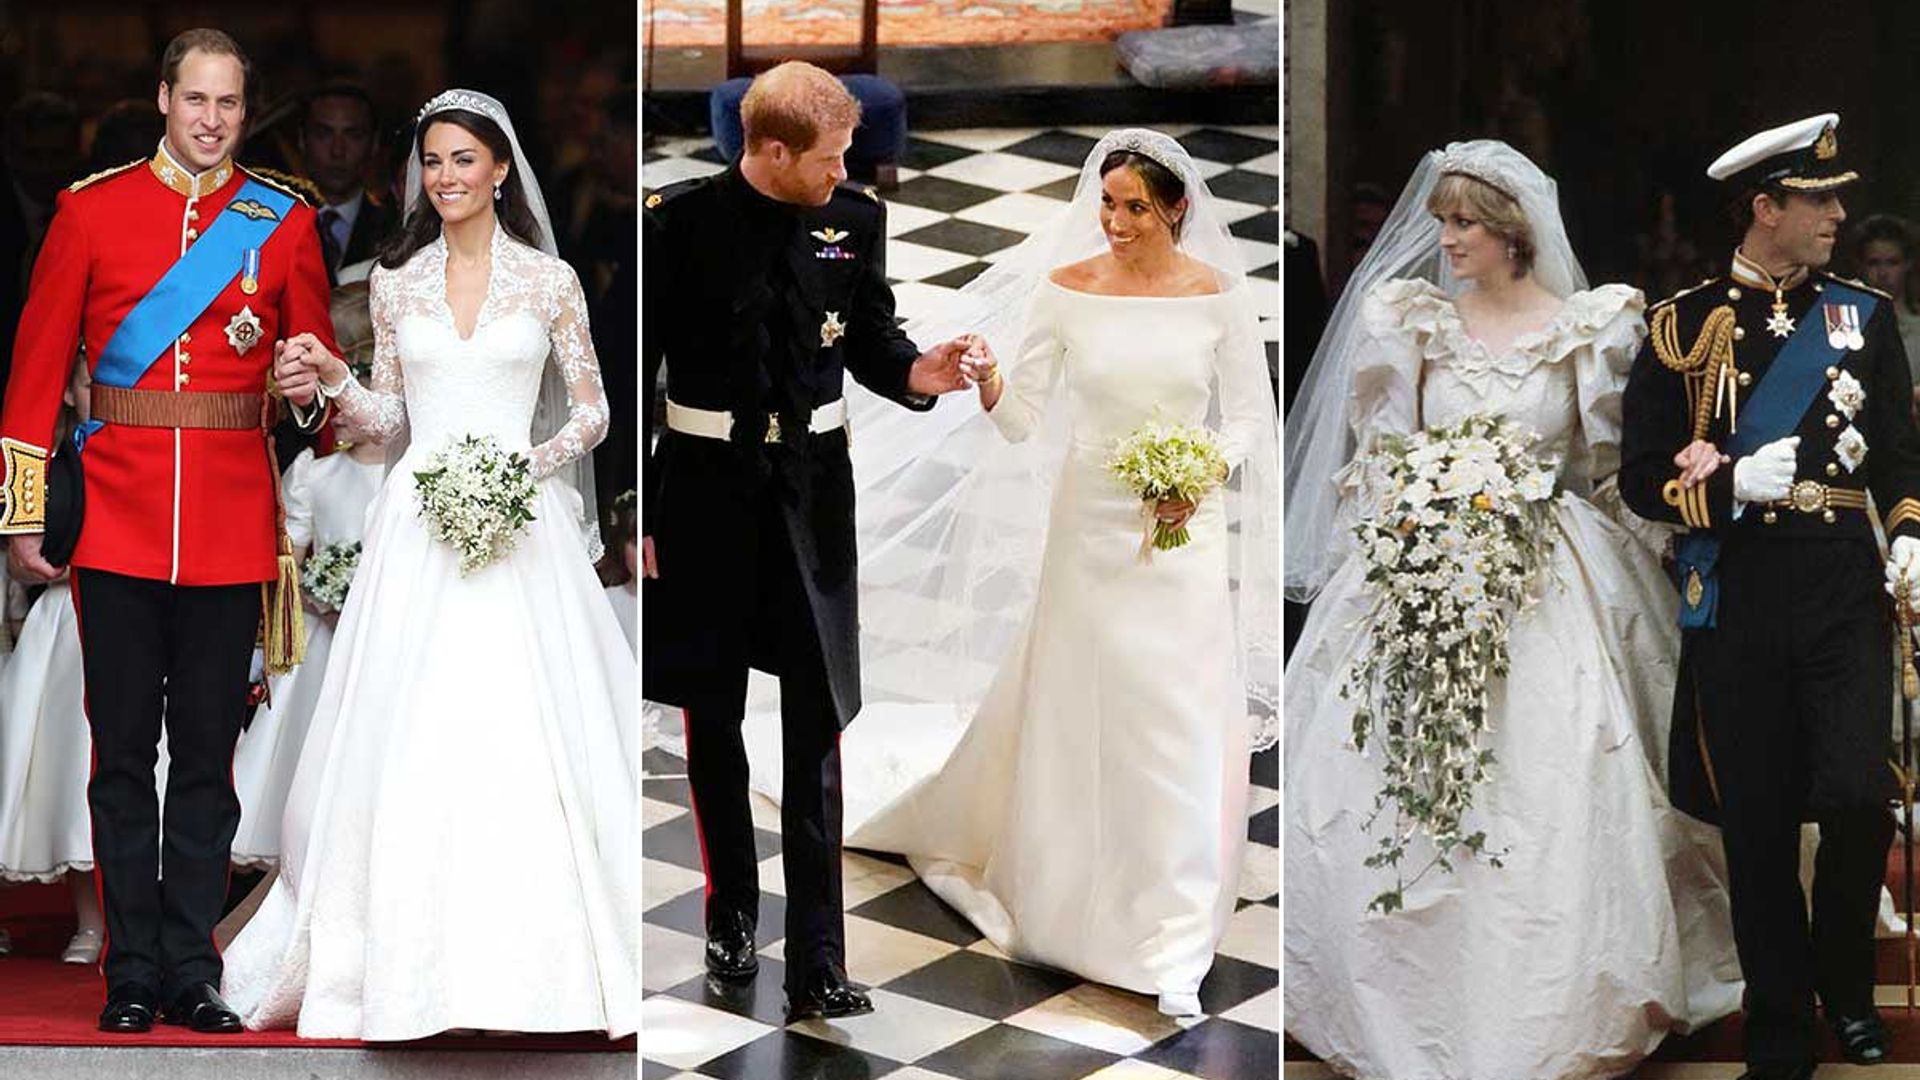 22 lesser-known royal wedding secrets that will leave you speechless